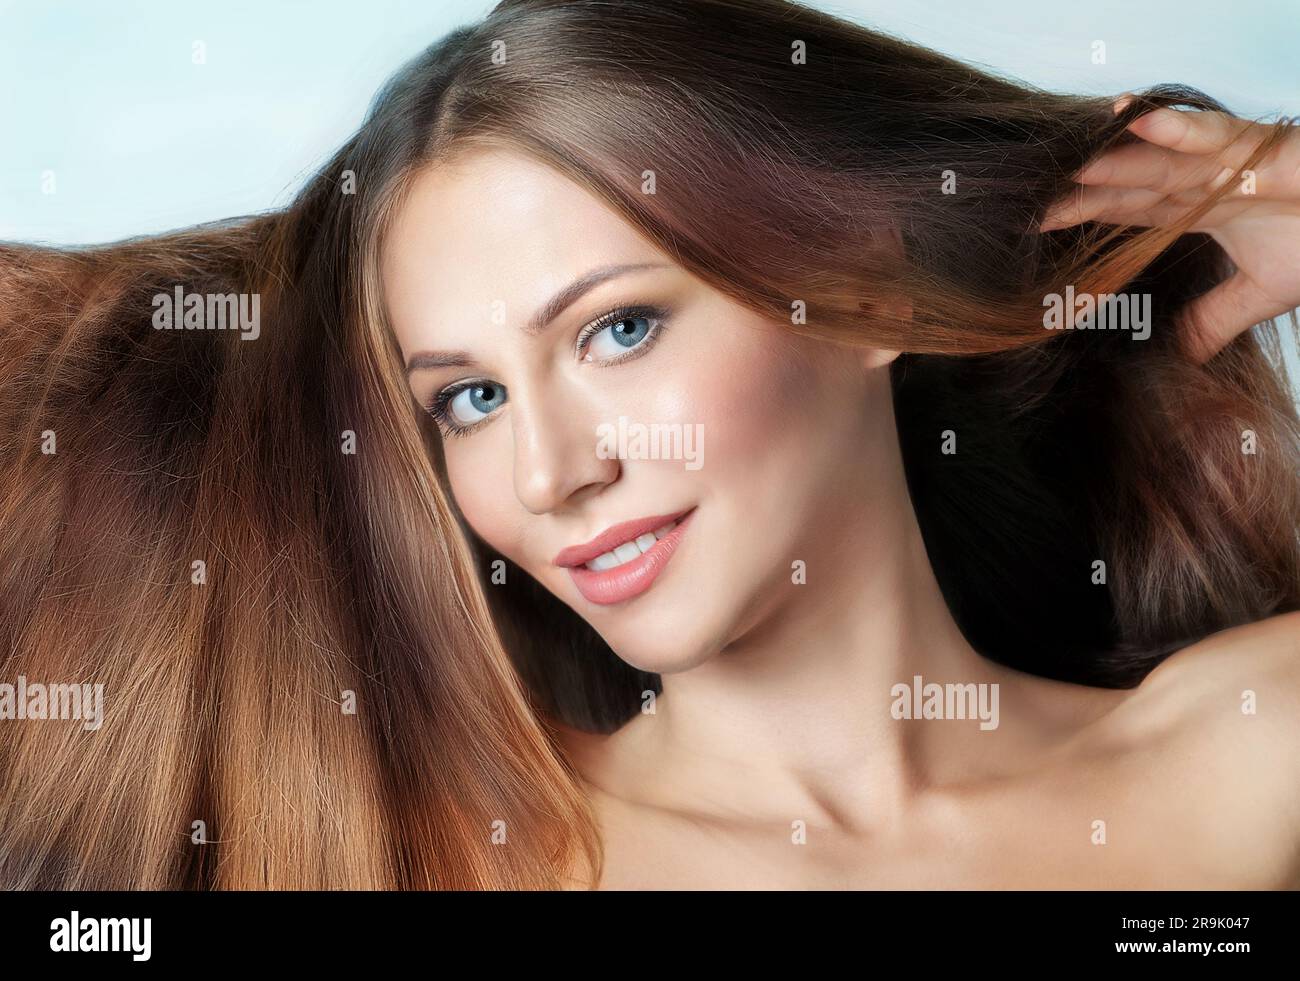 Profile of Beautiful Lady with Long Hair in Studio Stock Image - Image of  salon, woman: 65326161